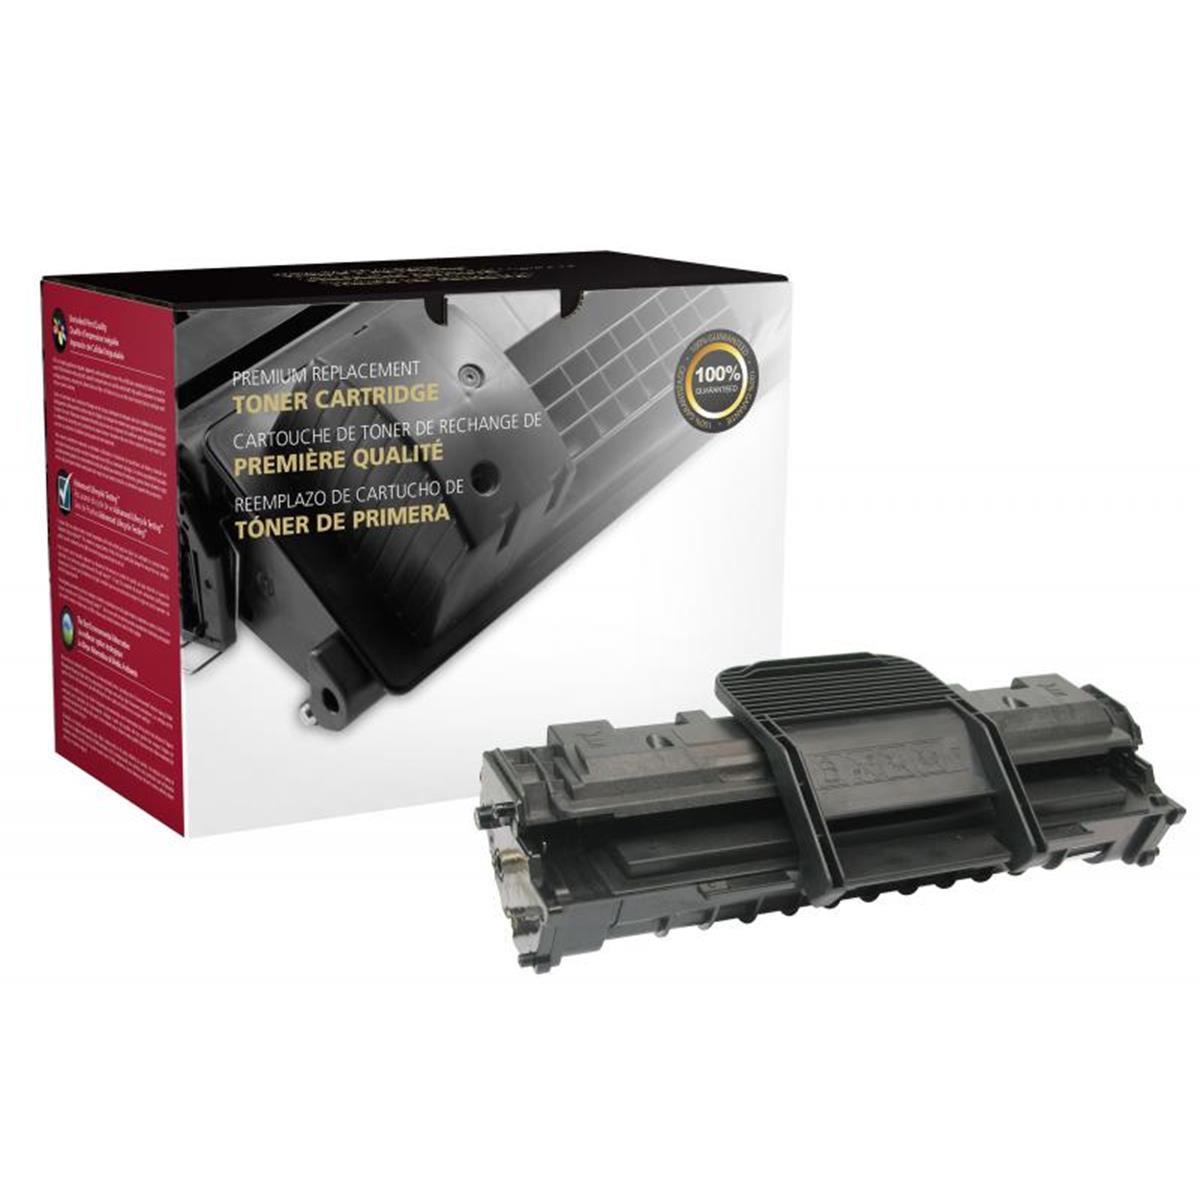 Picture of Dell 200104 High Yield Toner Cartridge for Dell 1100